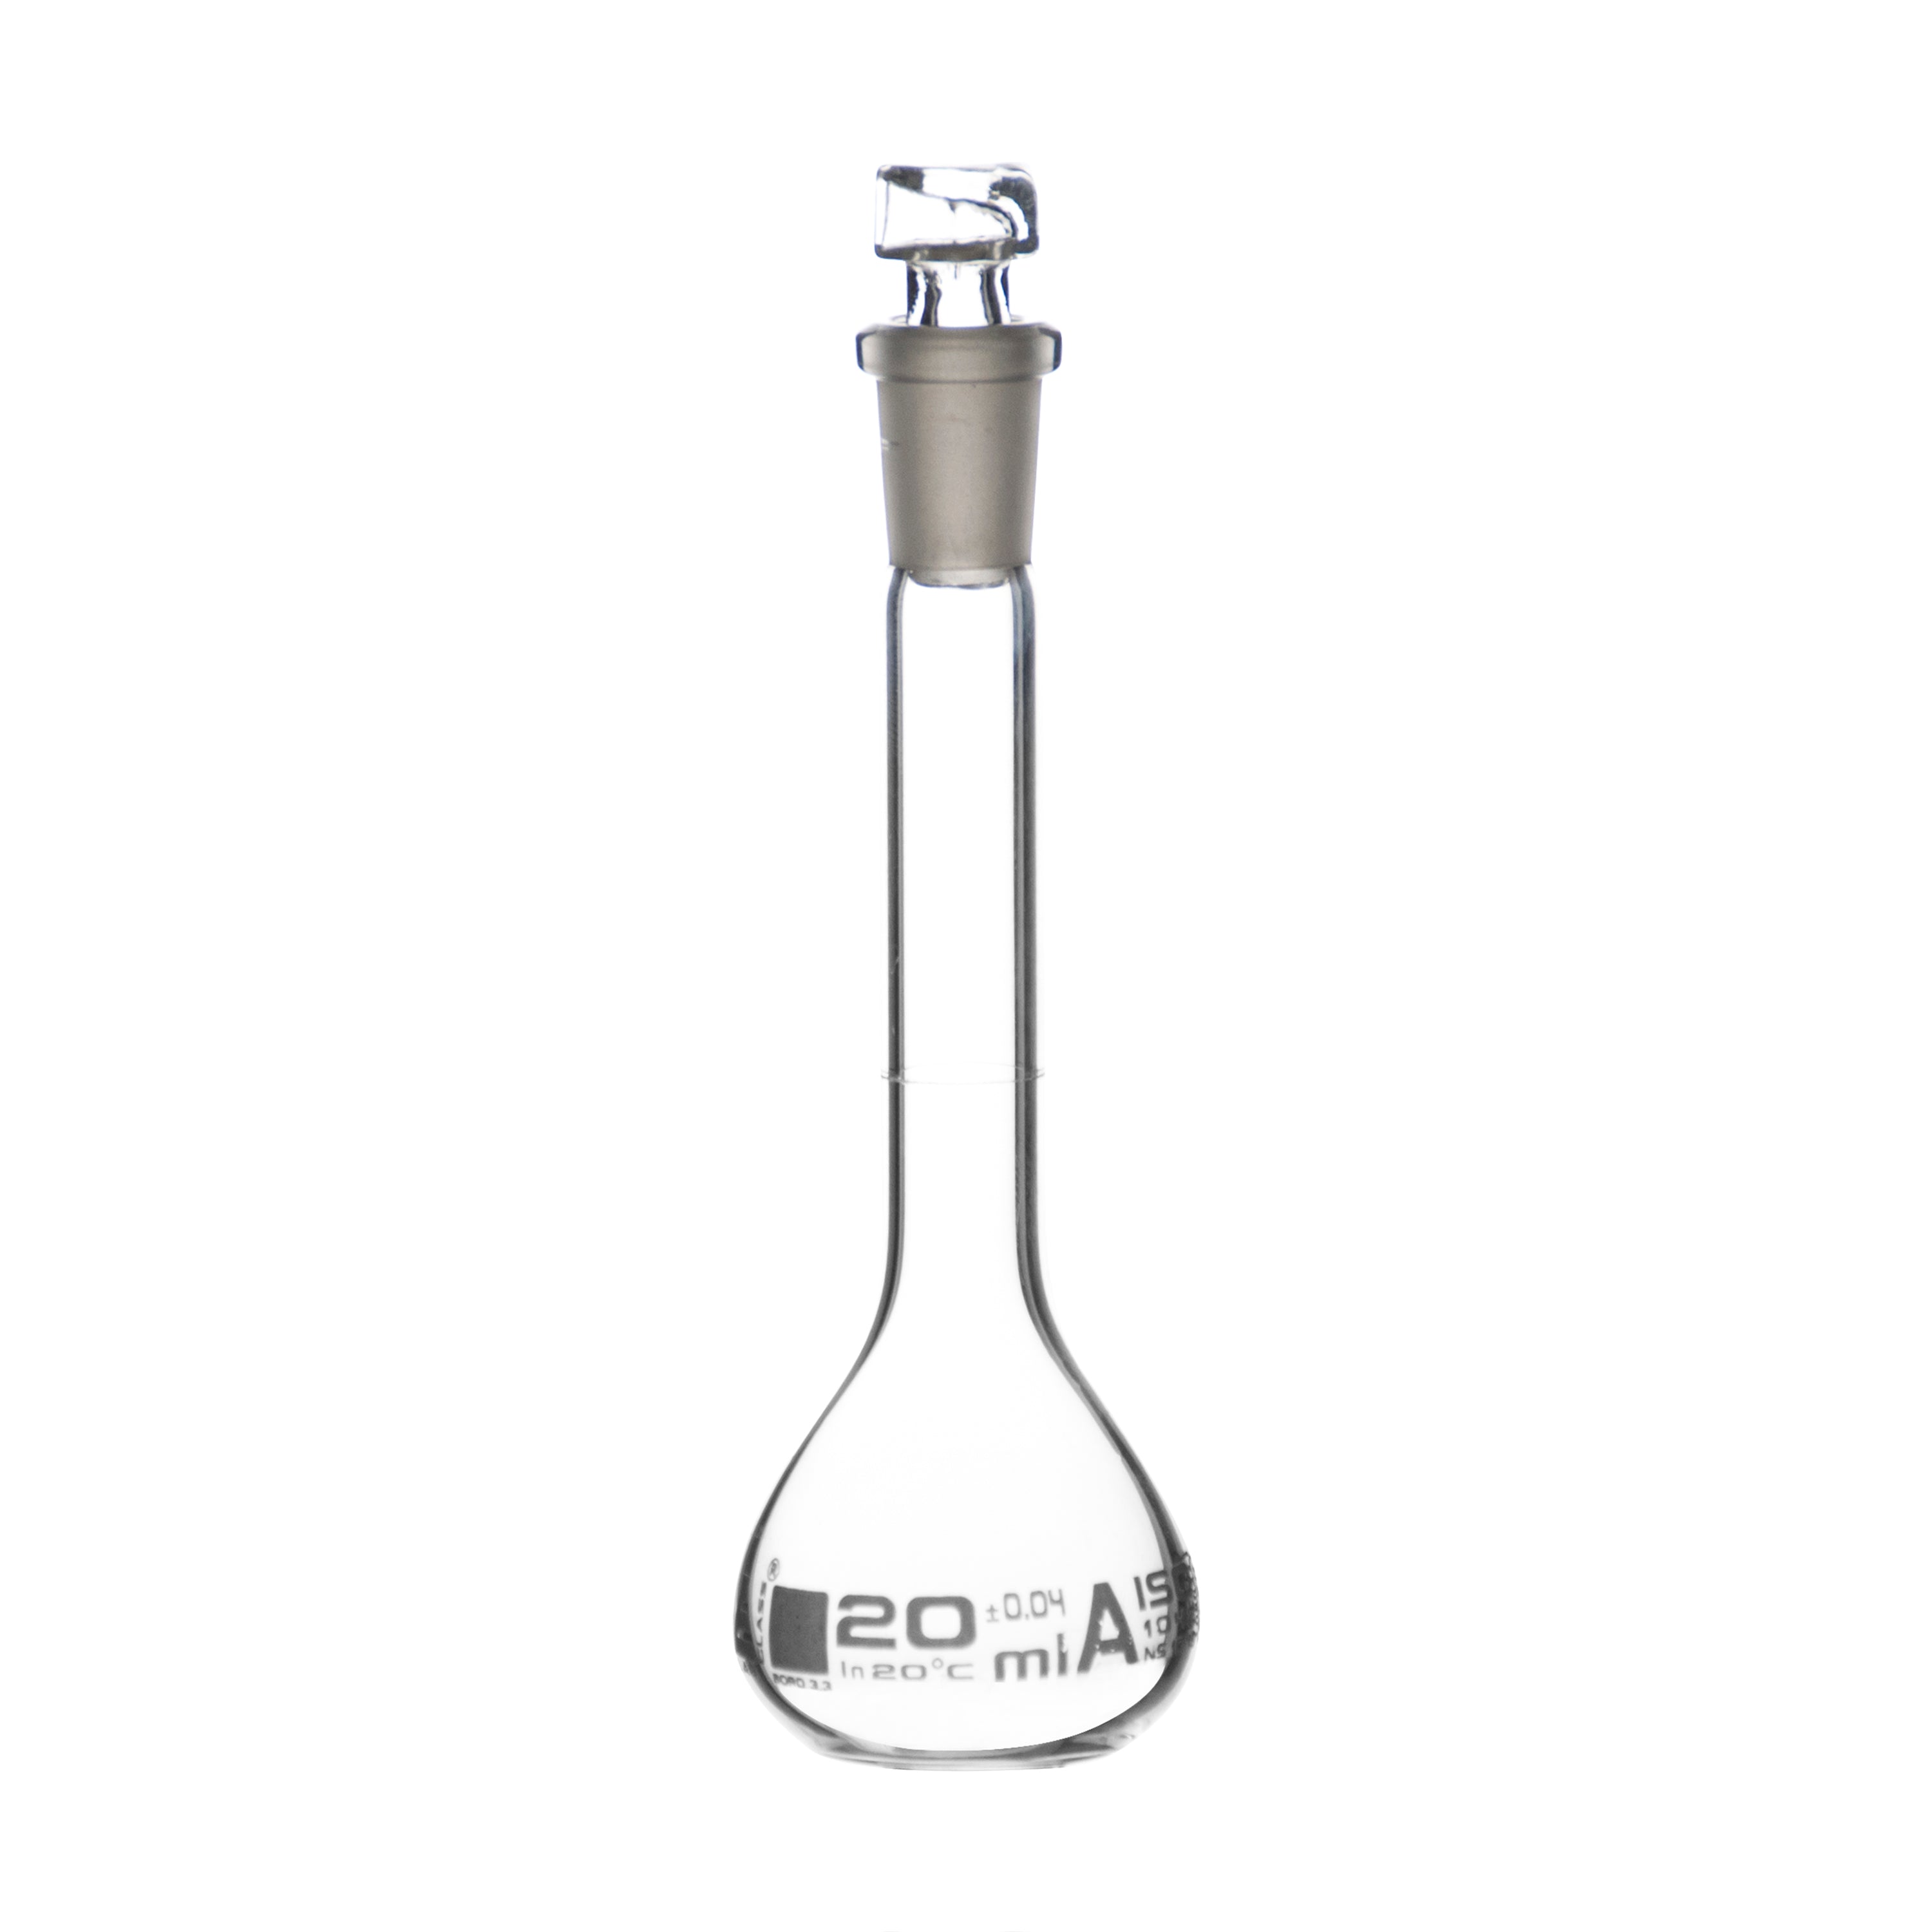 Borosilicate Volumetric Flask with Hollow Glass Stopper, 20ml, Class A, White Print, Autoclavable